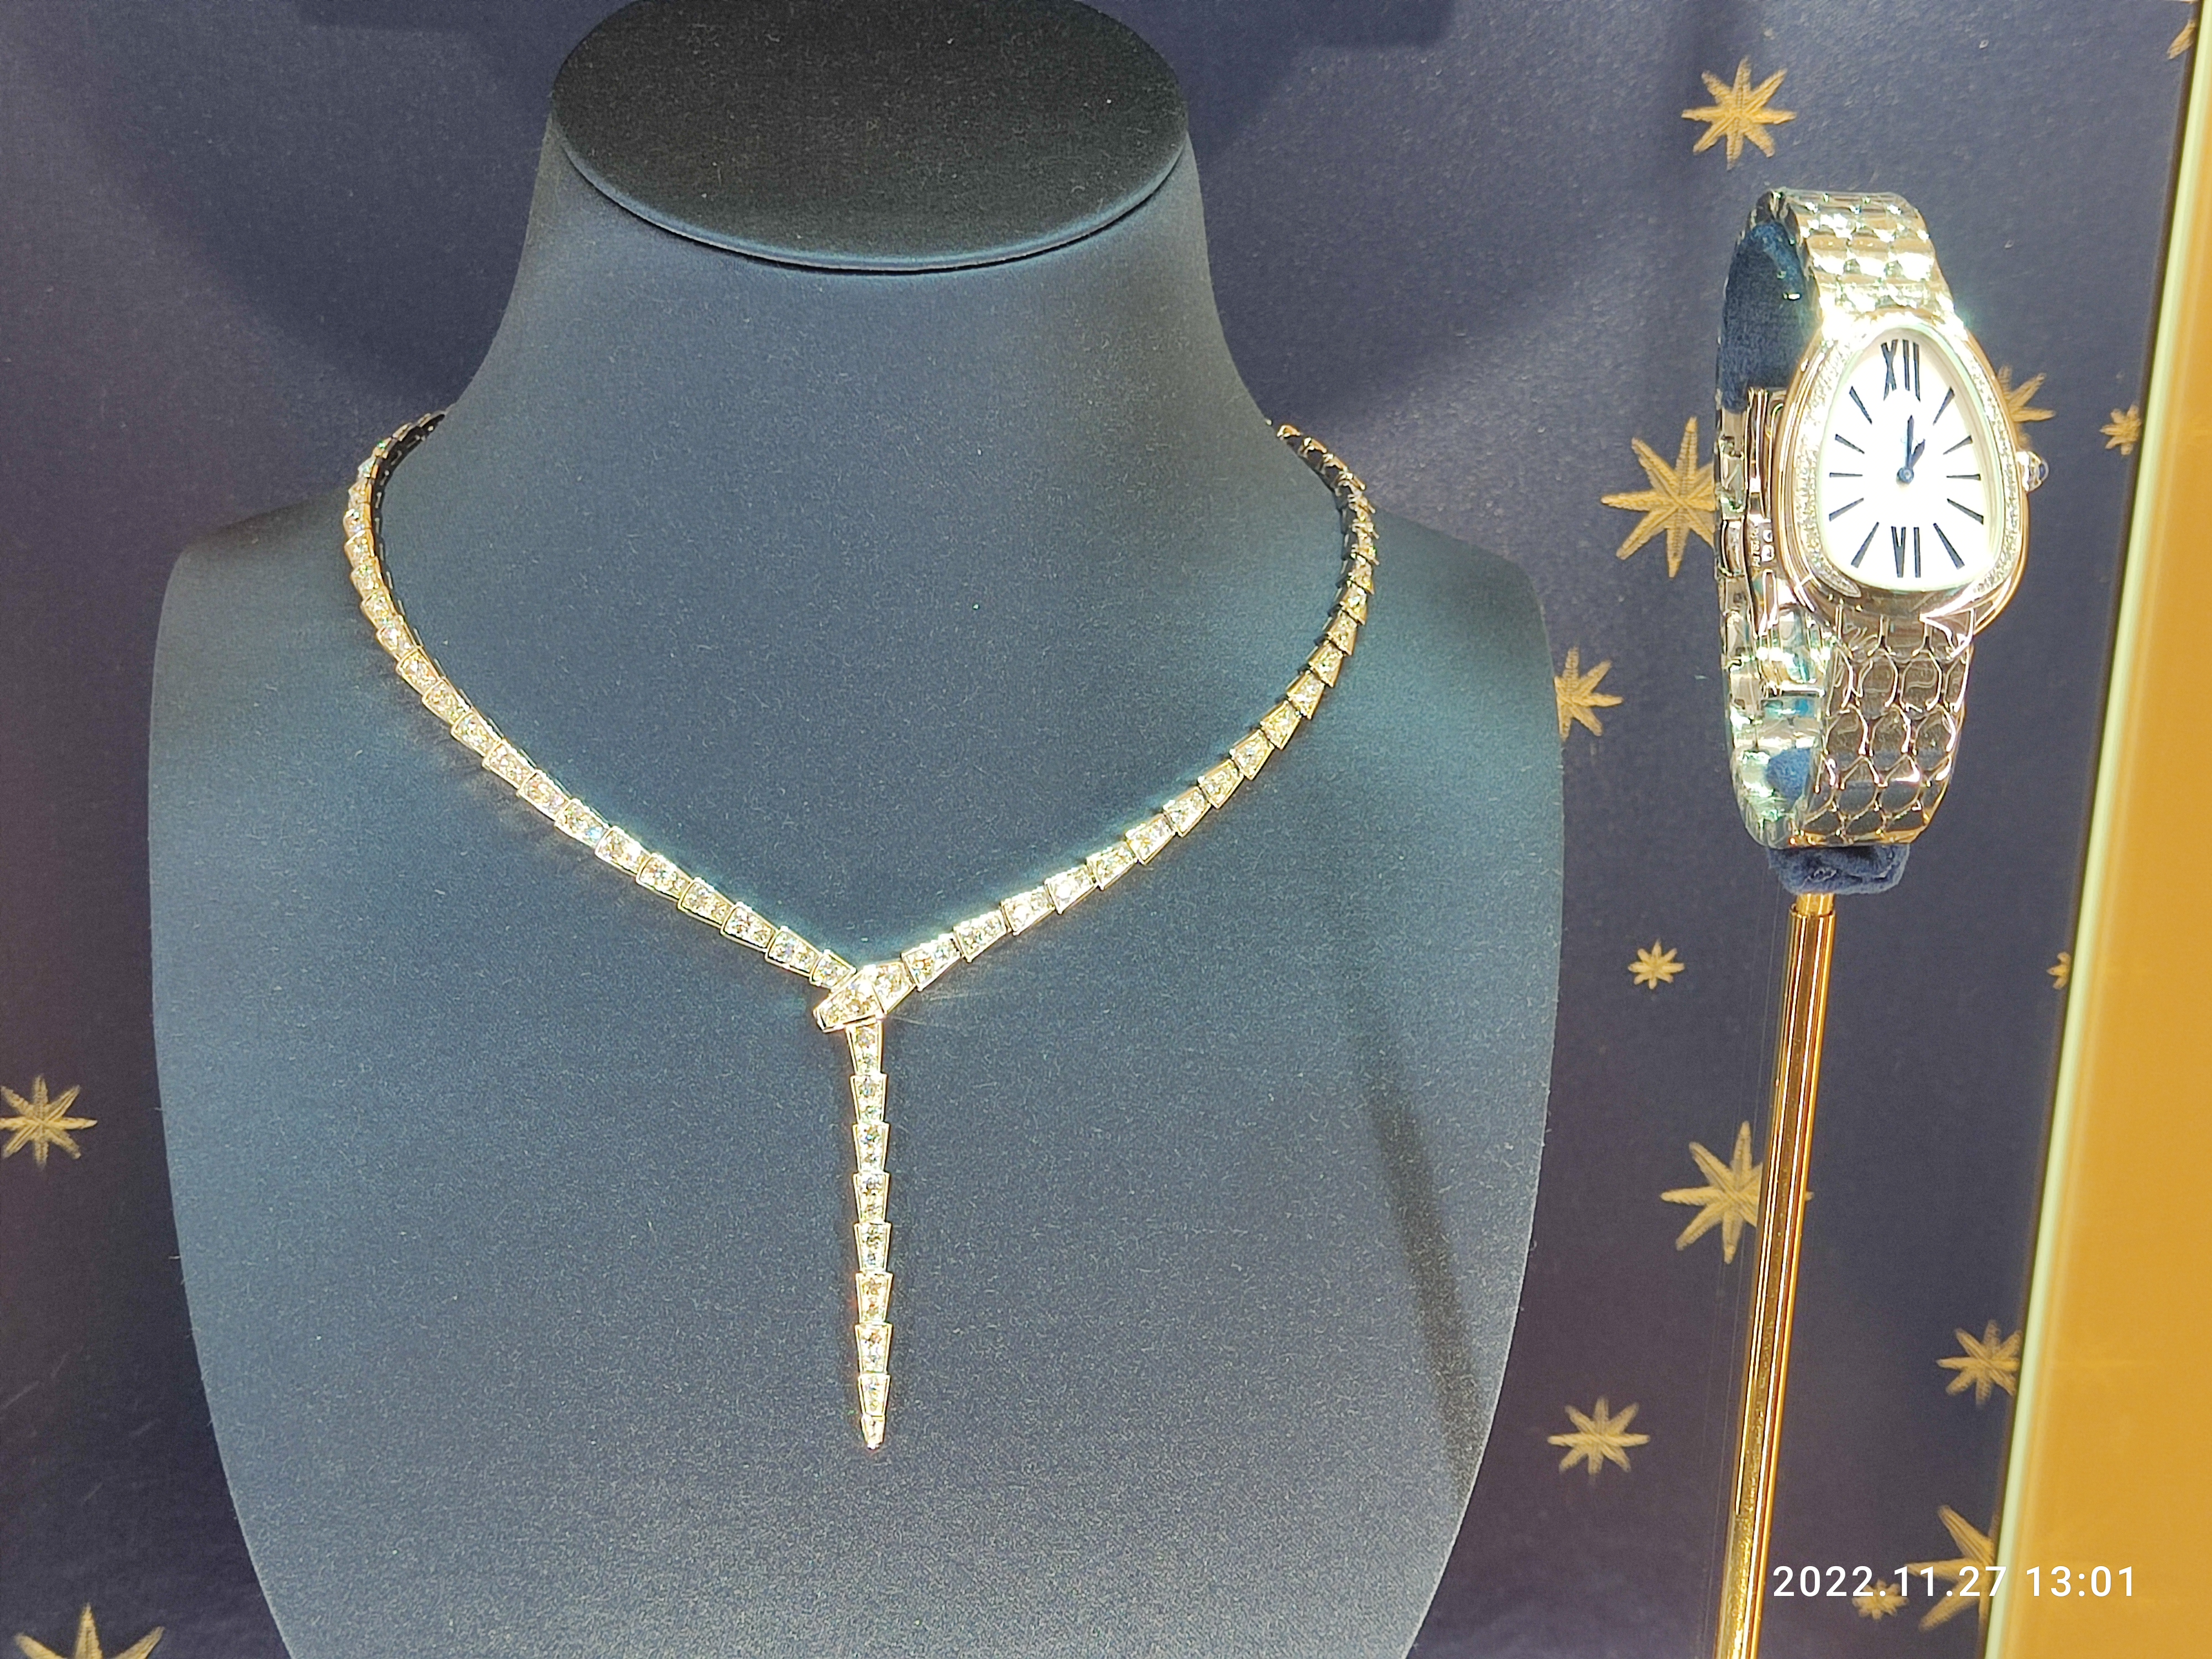 Reflecting Elegance: The Art of Precious Metals and Gems in High-End Jewelry